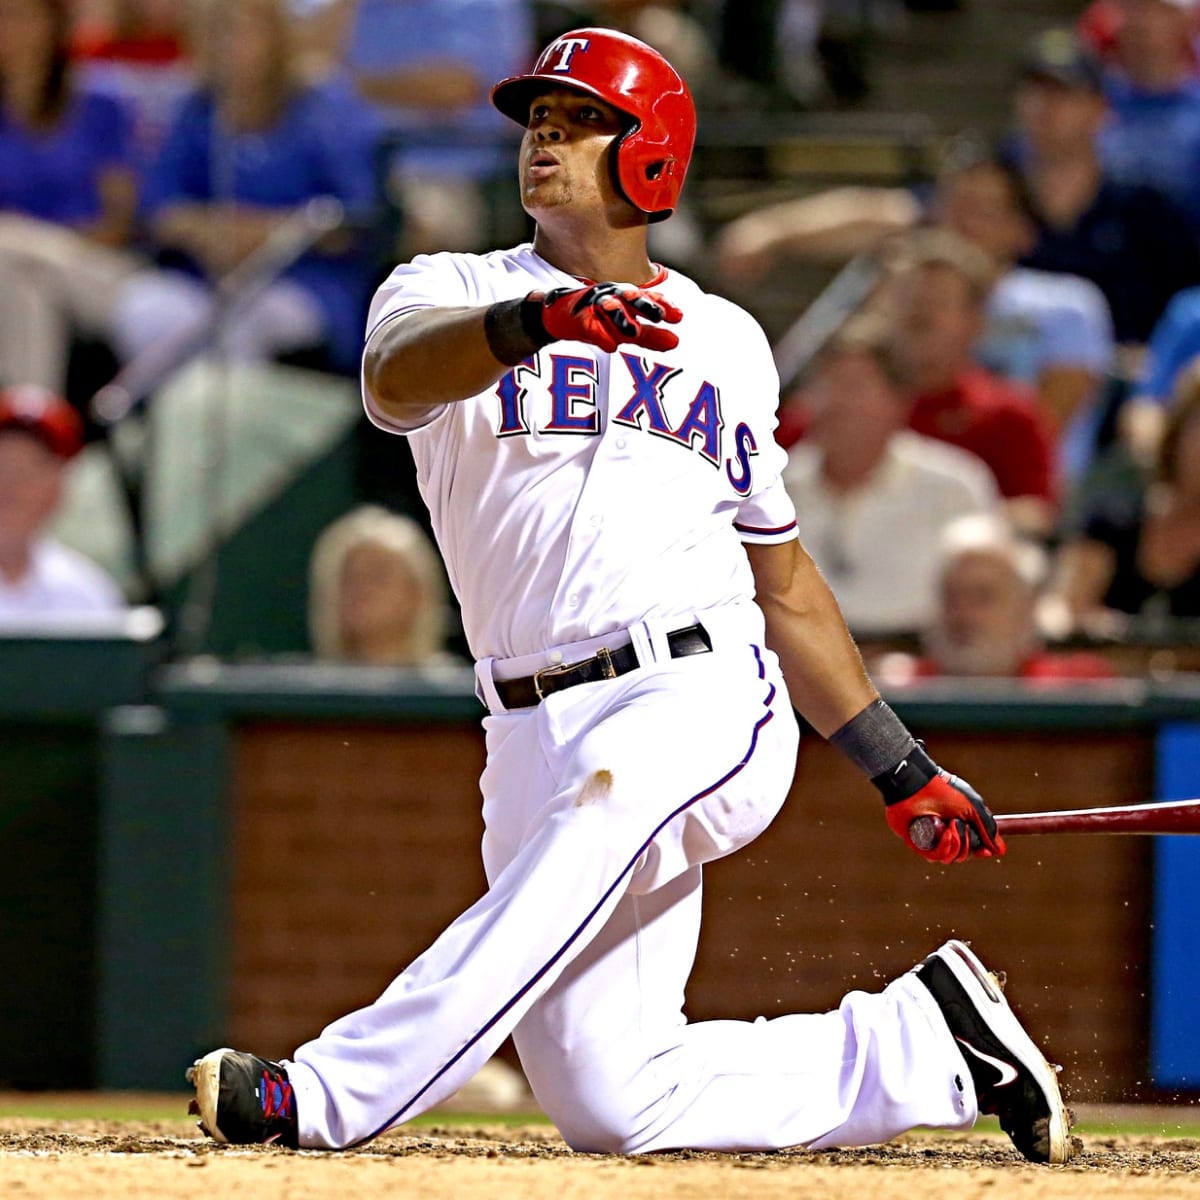 Texas rumors: Adrian Beltre nearing extension with Rangers - MLB Daily Dish